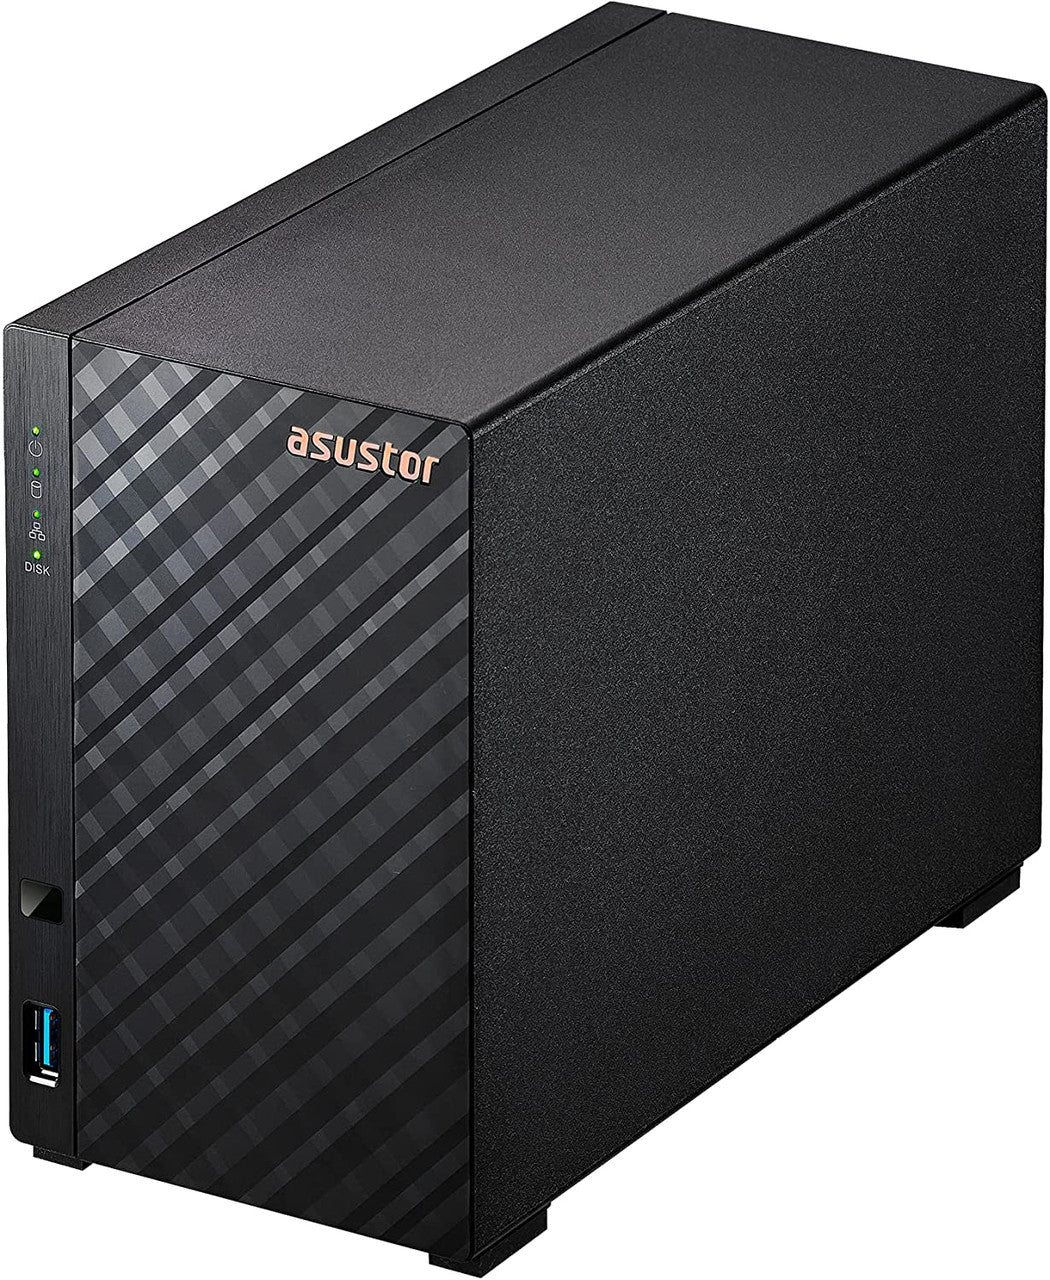 Asustor AS1102T 2-Bay Drivestor 2 NAS with 1GB RAM and 20TB (2x10TB) Western Digital RED Plus Drives